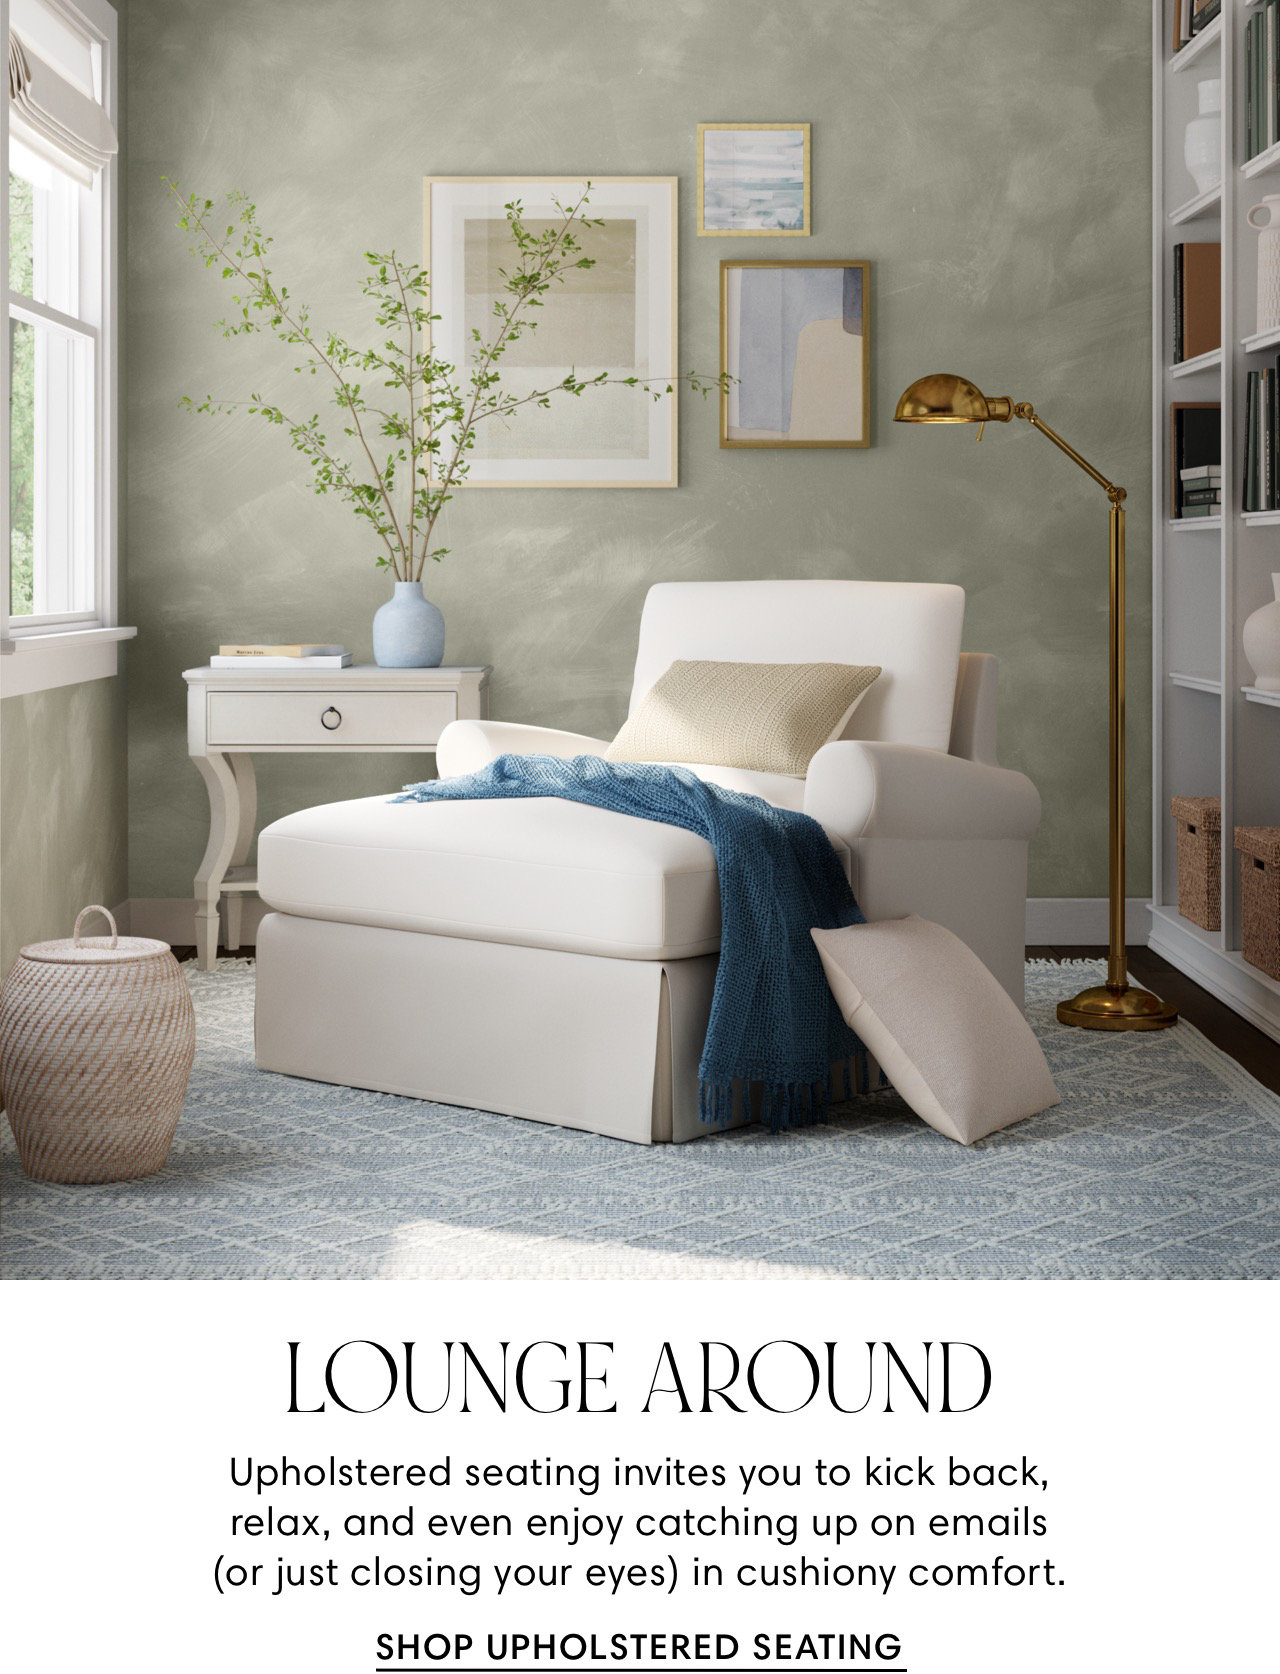 LOUNGE AROUND Upholstered seating invites you to kick back, relax, and even enjoy catching up on emails or just closing your eyes in cushiony comfort. SHOP UPHOLSTERED SEATING 